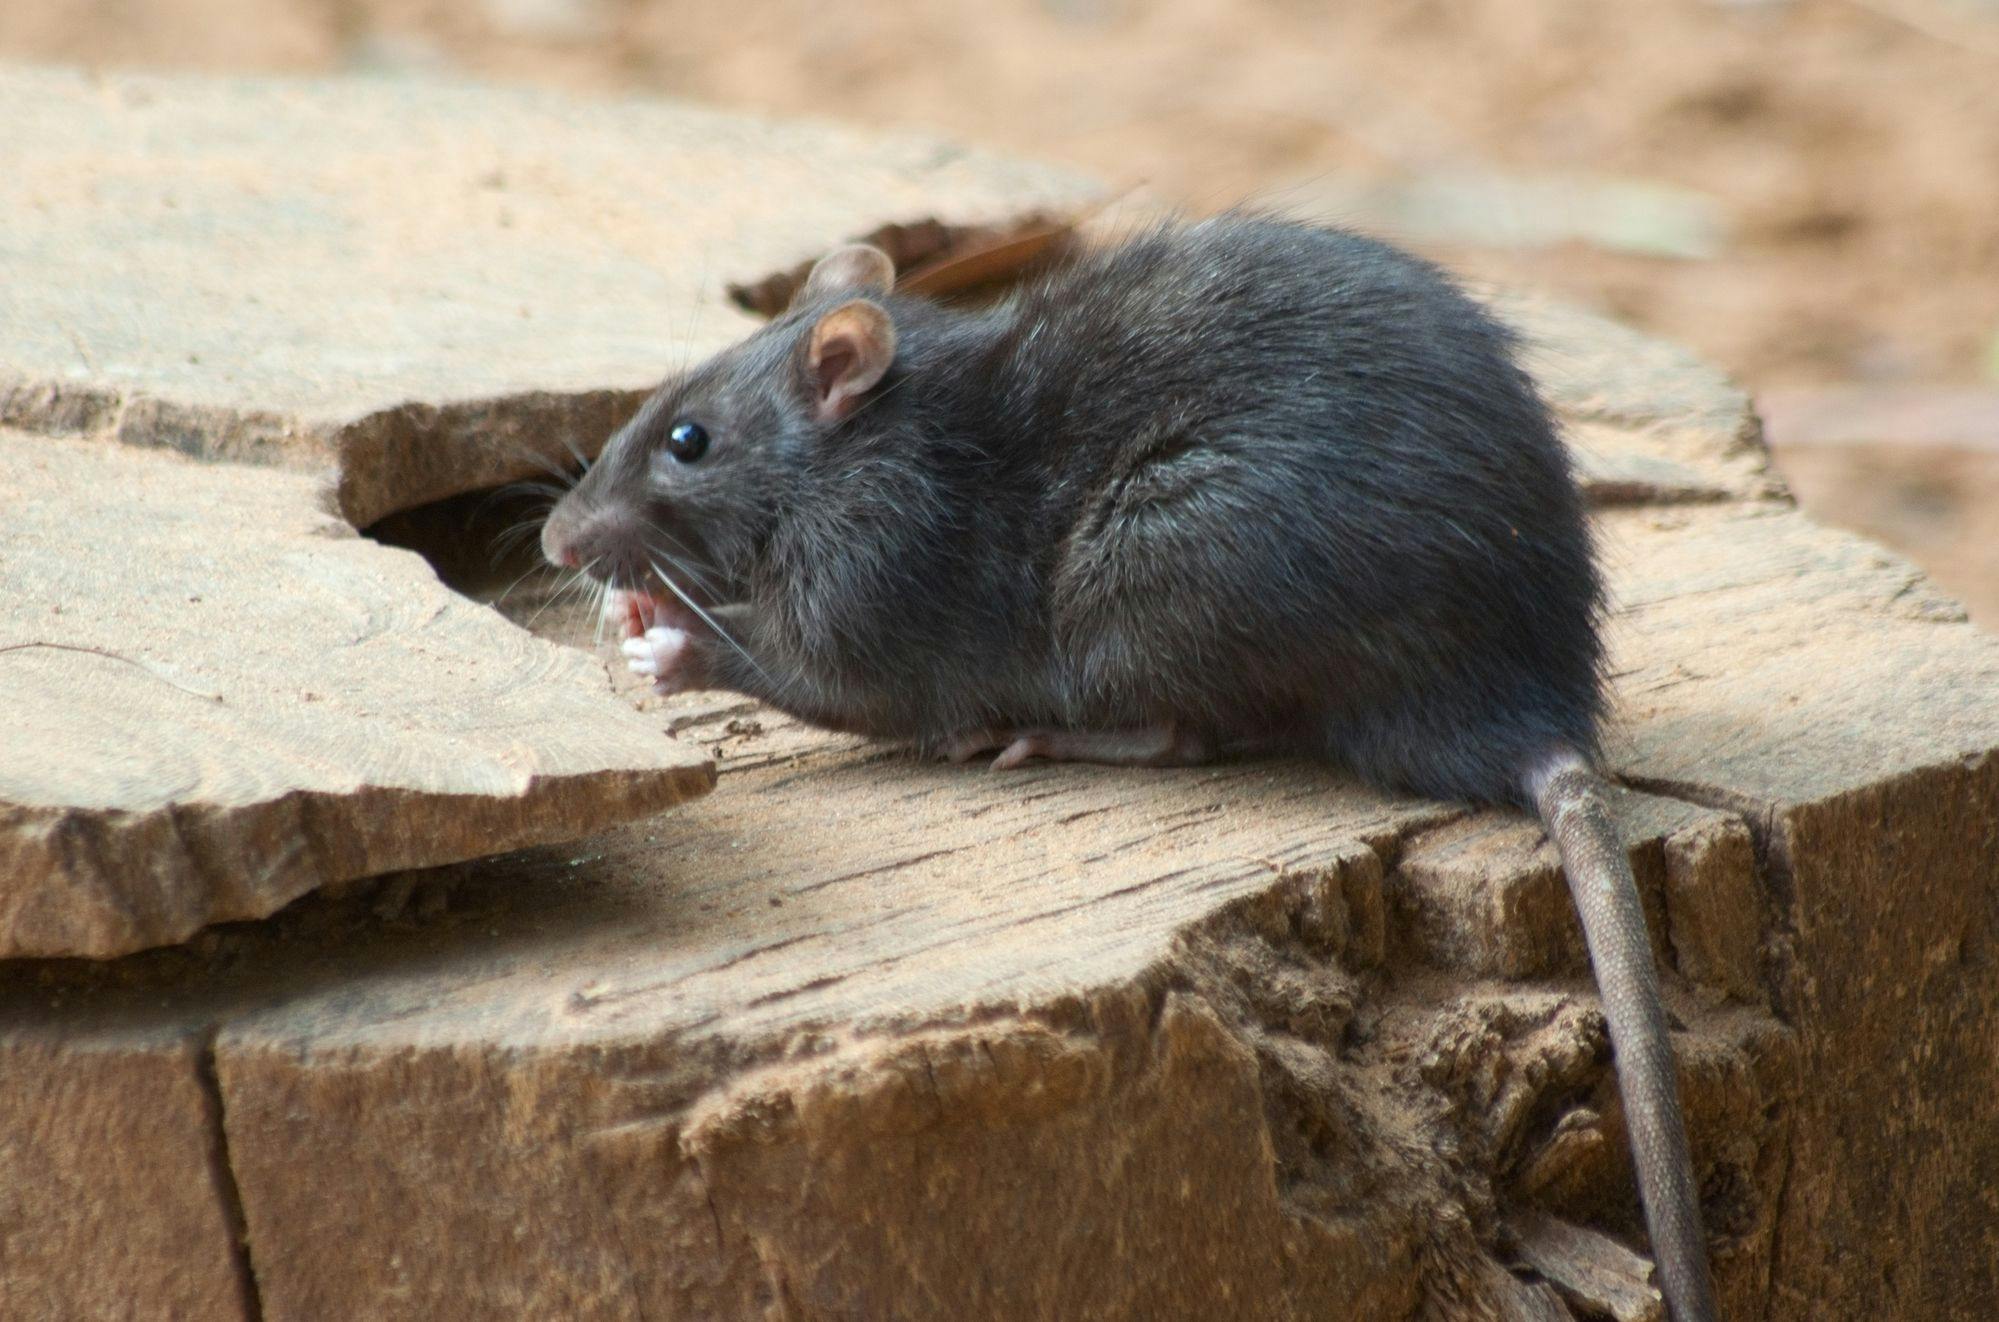 Dive into effective rodent management strategies, from ultrasonic repellents to professional inspections, ensuring a rodent-free environment.